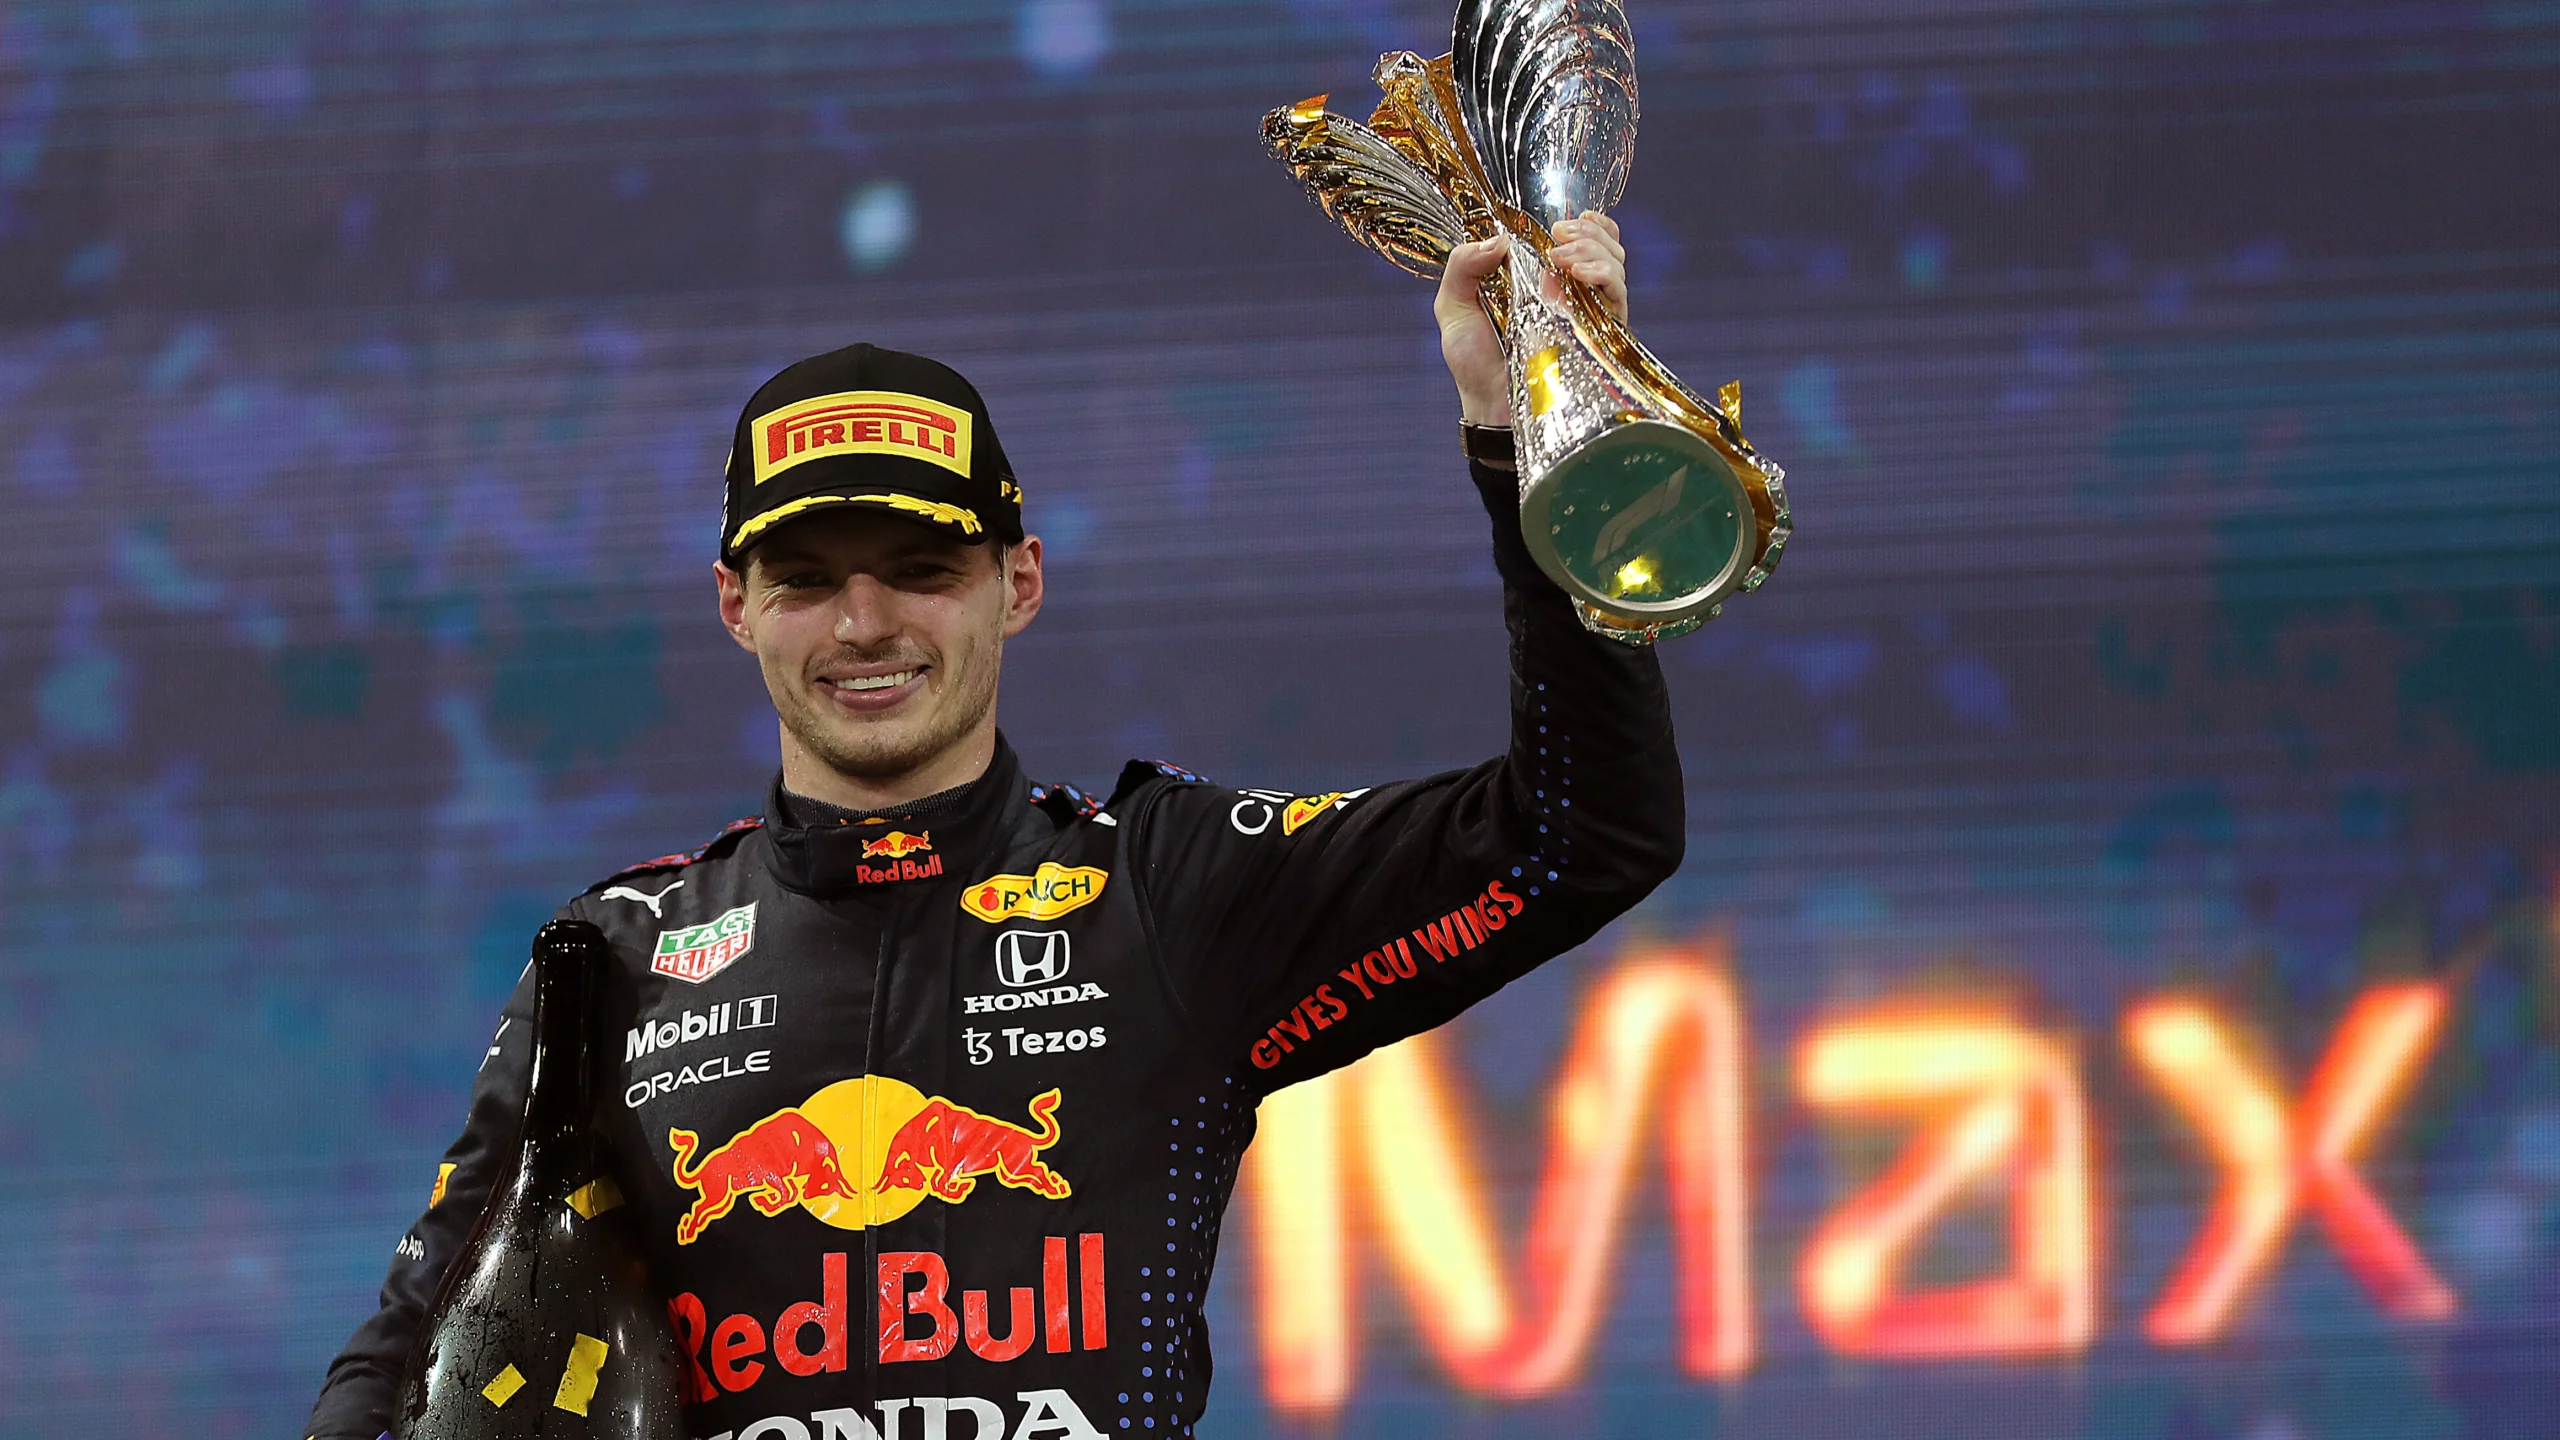 When did max verstappen become world champion?